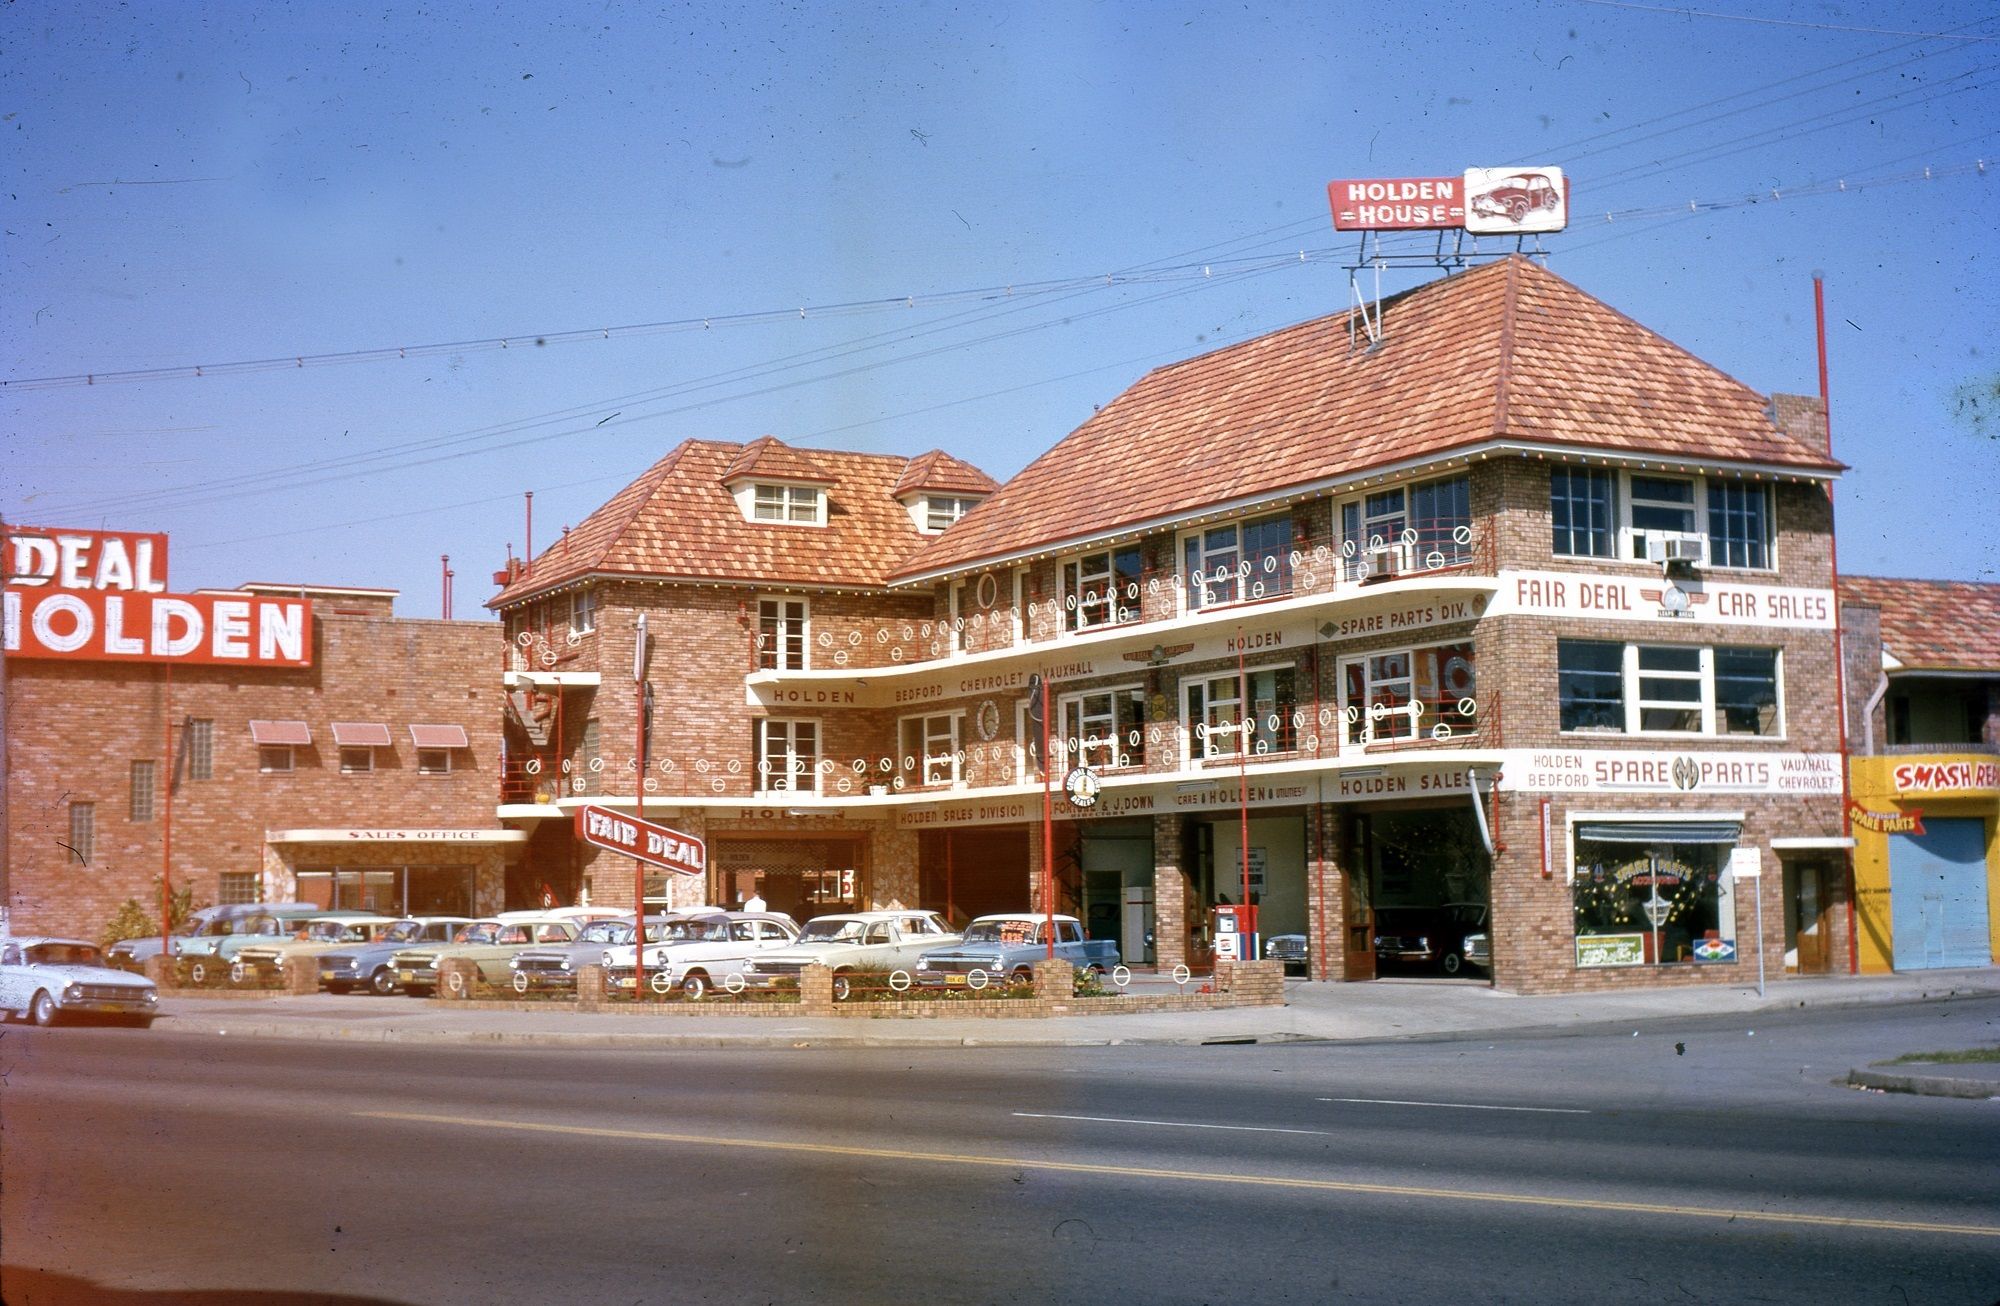 Holden House, cnr Church Street and Early Street, Parramatta, c. late-1960s (Image: City of Parramatta Community Archives, Tremain Collection).